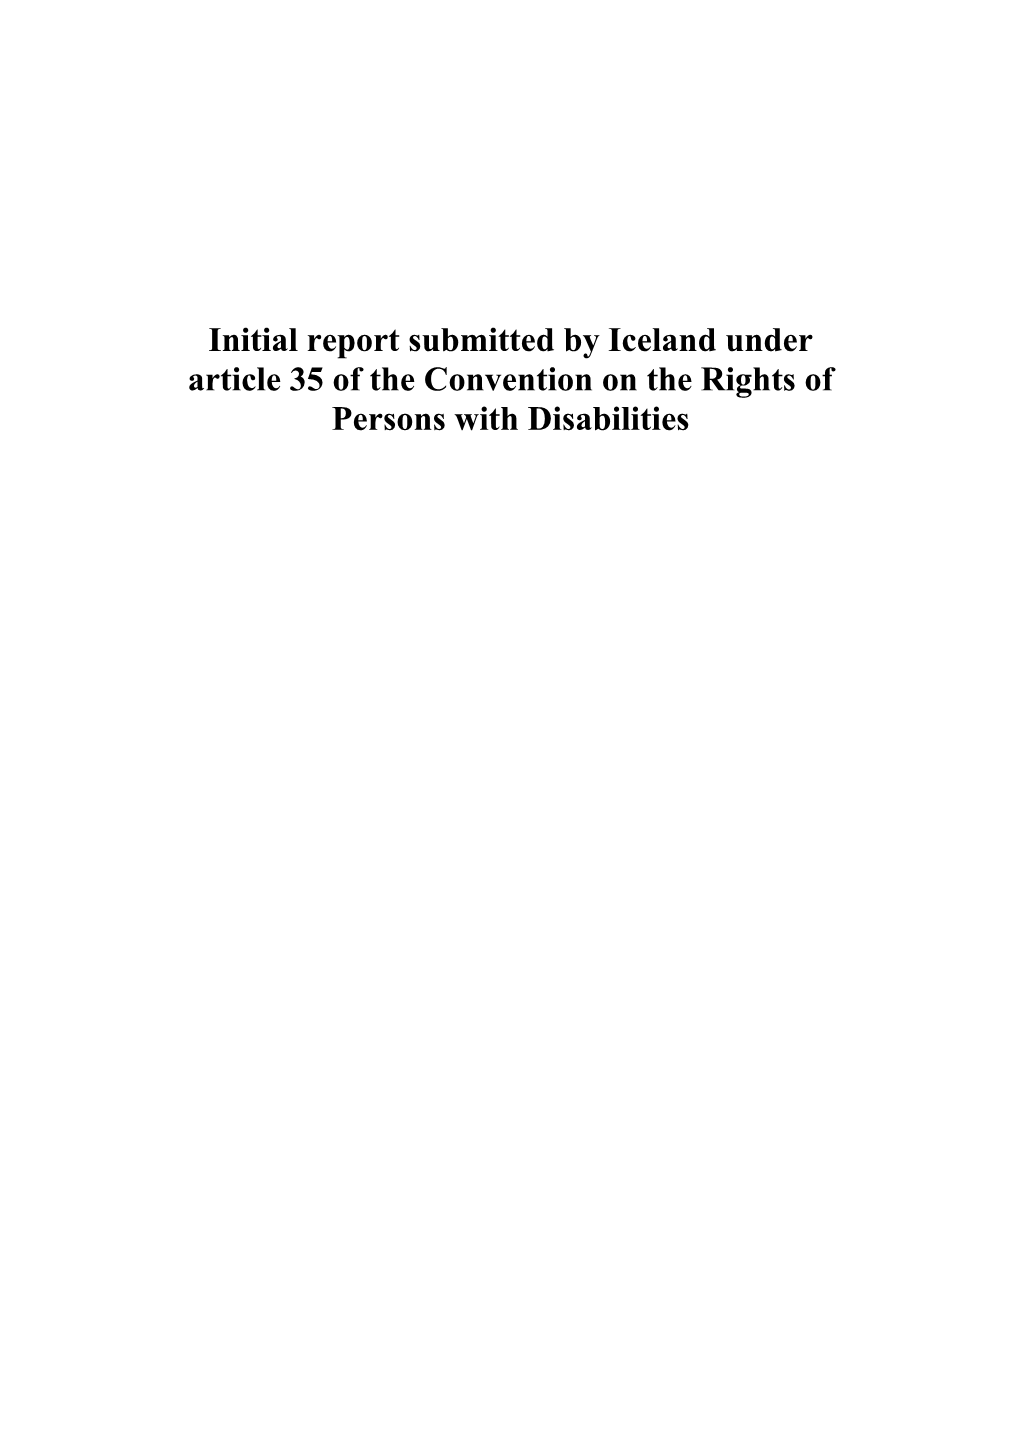 Initial Report Submitted by Iceland Under Article 35 of the Convention on the Rights of Persons with Disabilities